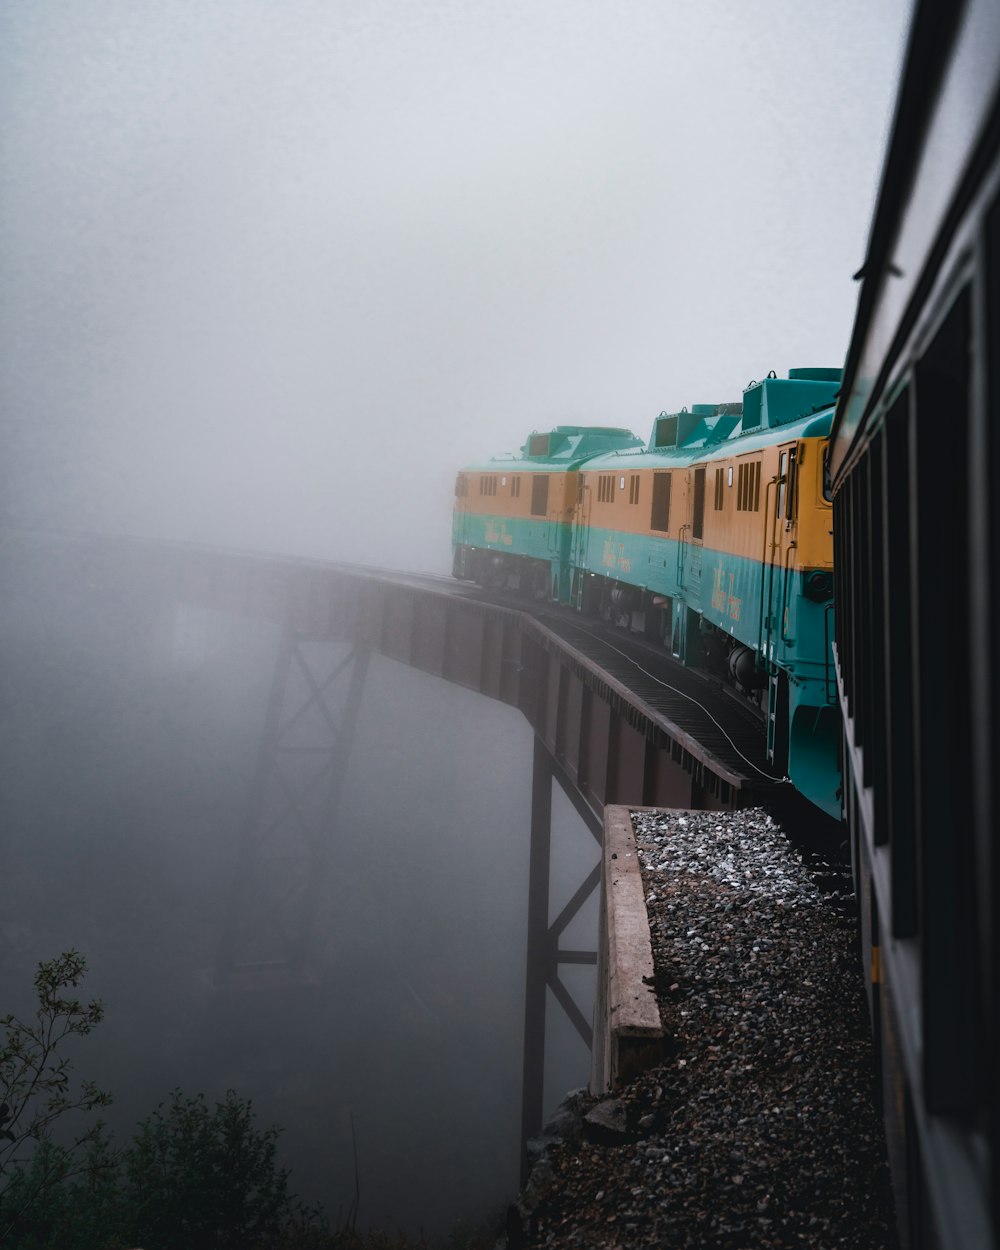 train on track about to cross a bridge during foggy weather